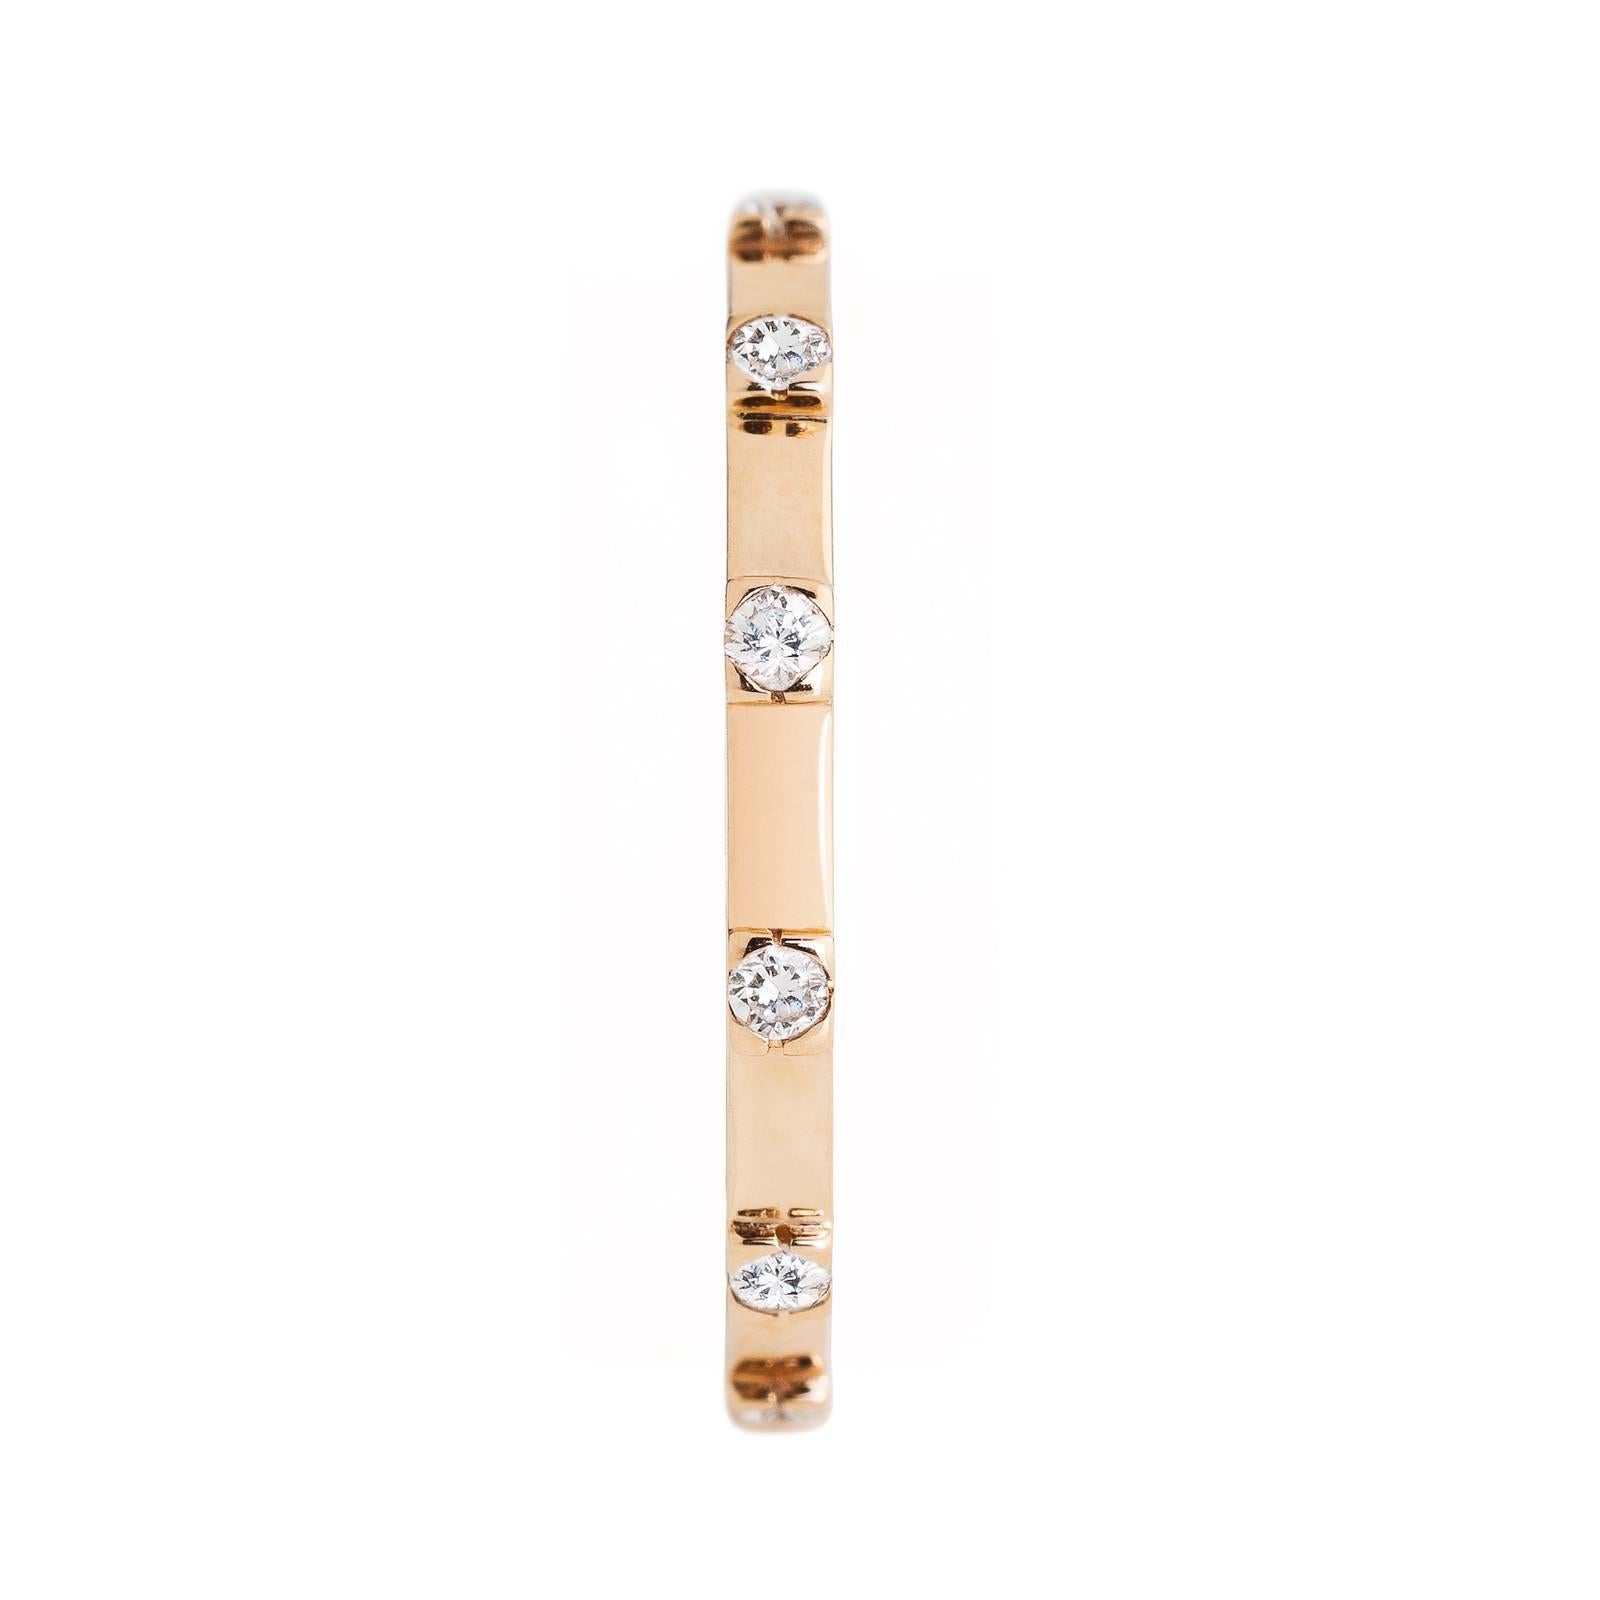 18K Roségold
ca. 11 weiße Diamanten
ca. 0,15 ct.

Love is the answer: Our new Love Collection is a must have for all confident women.

Available in 3 Business Days Ring Size 53. On request all ring sizes available.